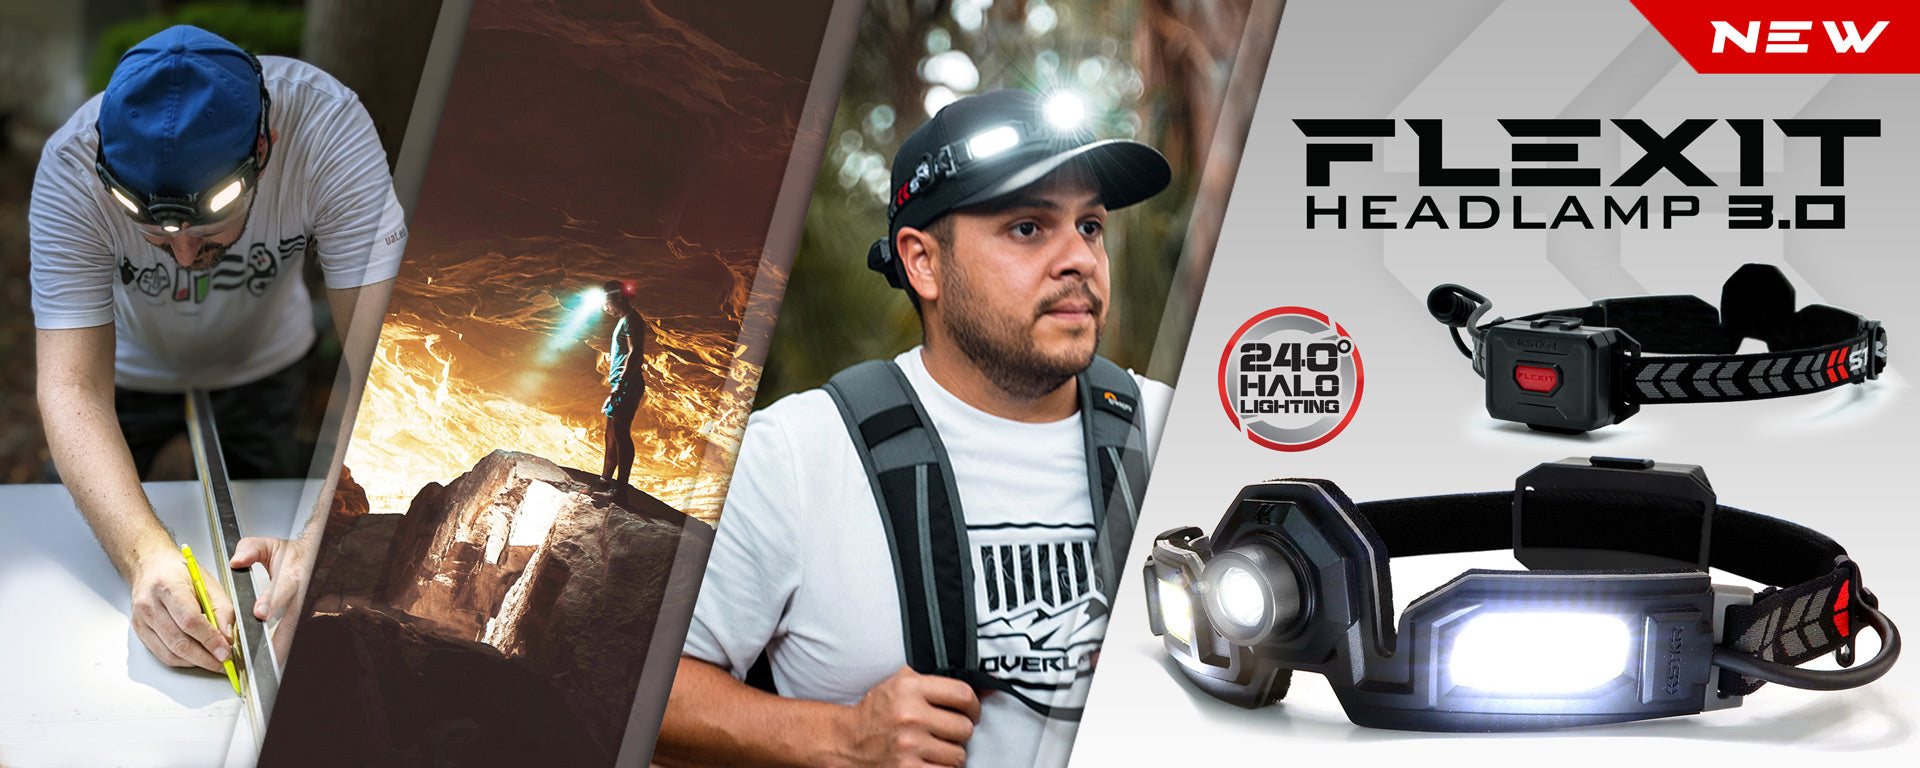 FLEXIT Headlamp 3.0 Banner featuring 3 lifestyle images and 2 studio pics of the product